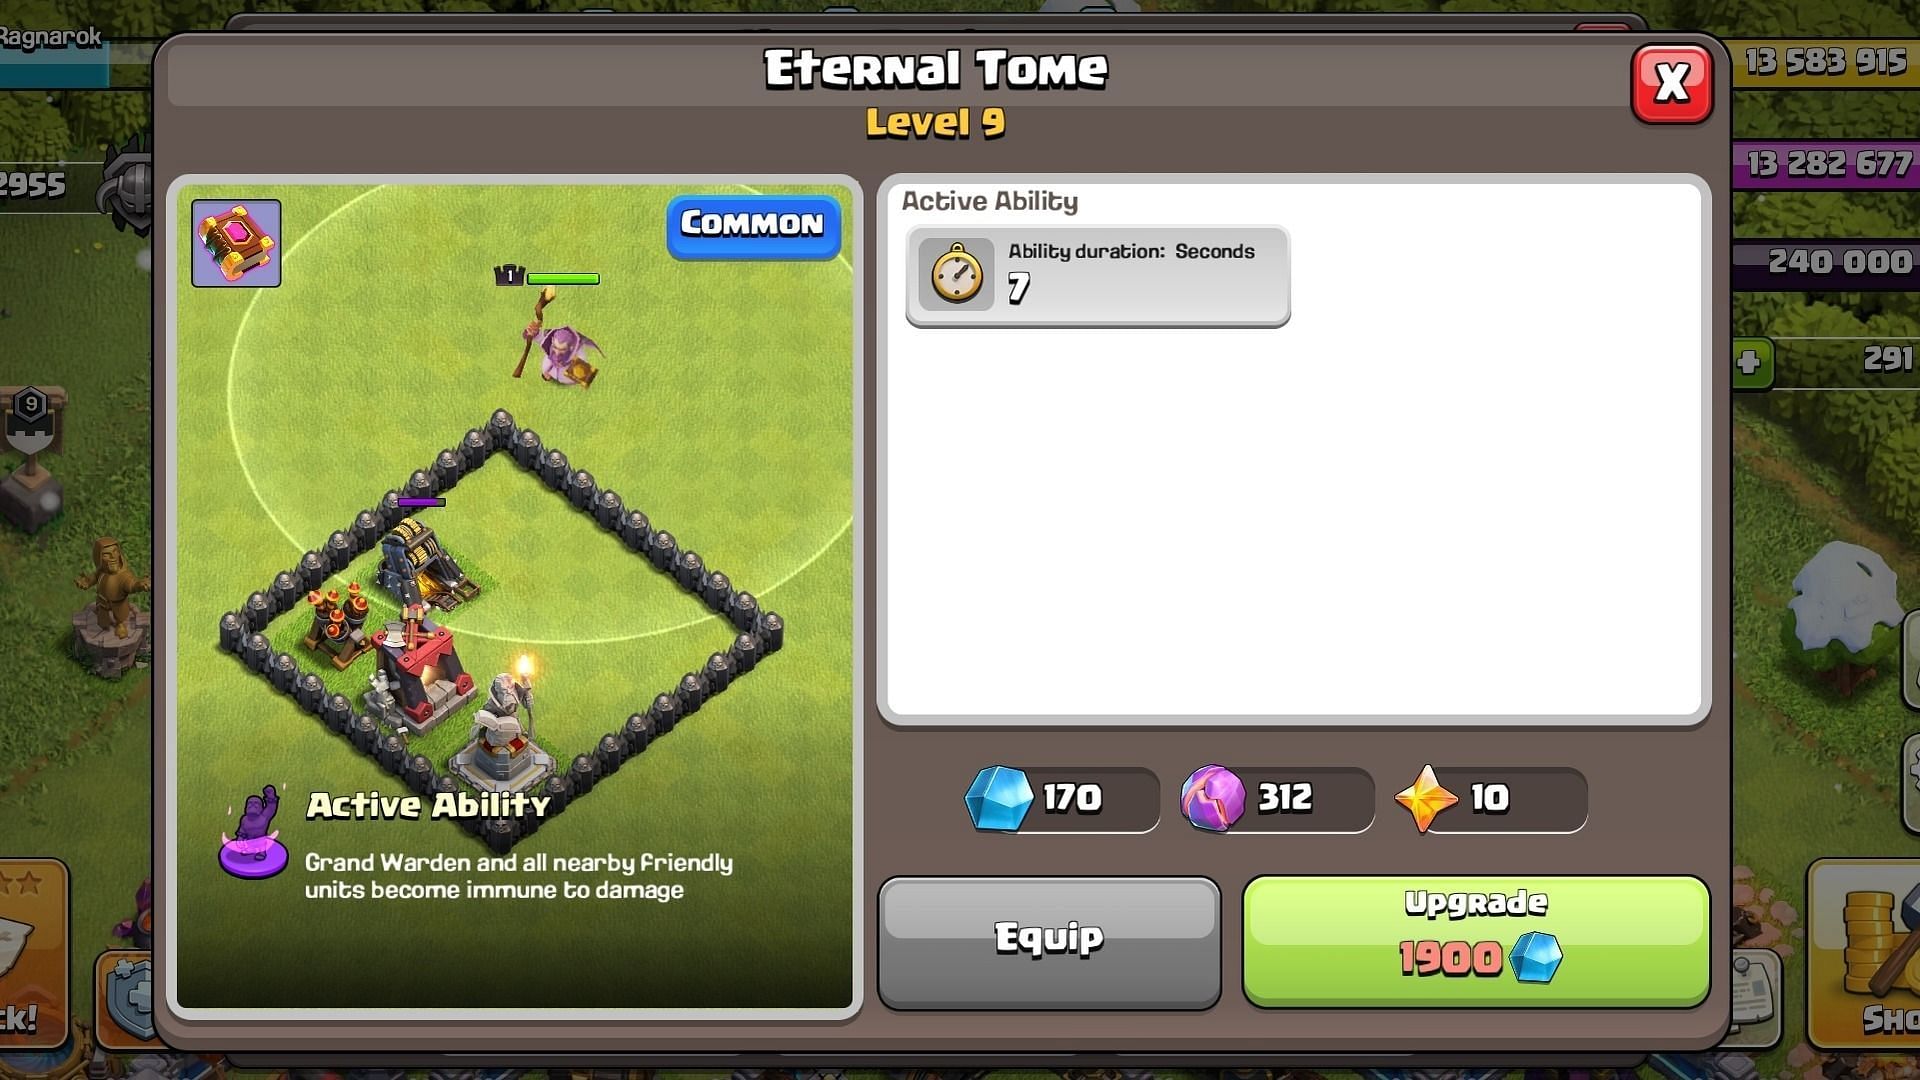 Clash of Clans Eternal Tome stats (Image via Supercell)